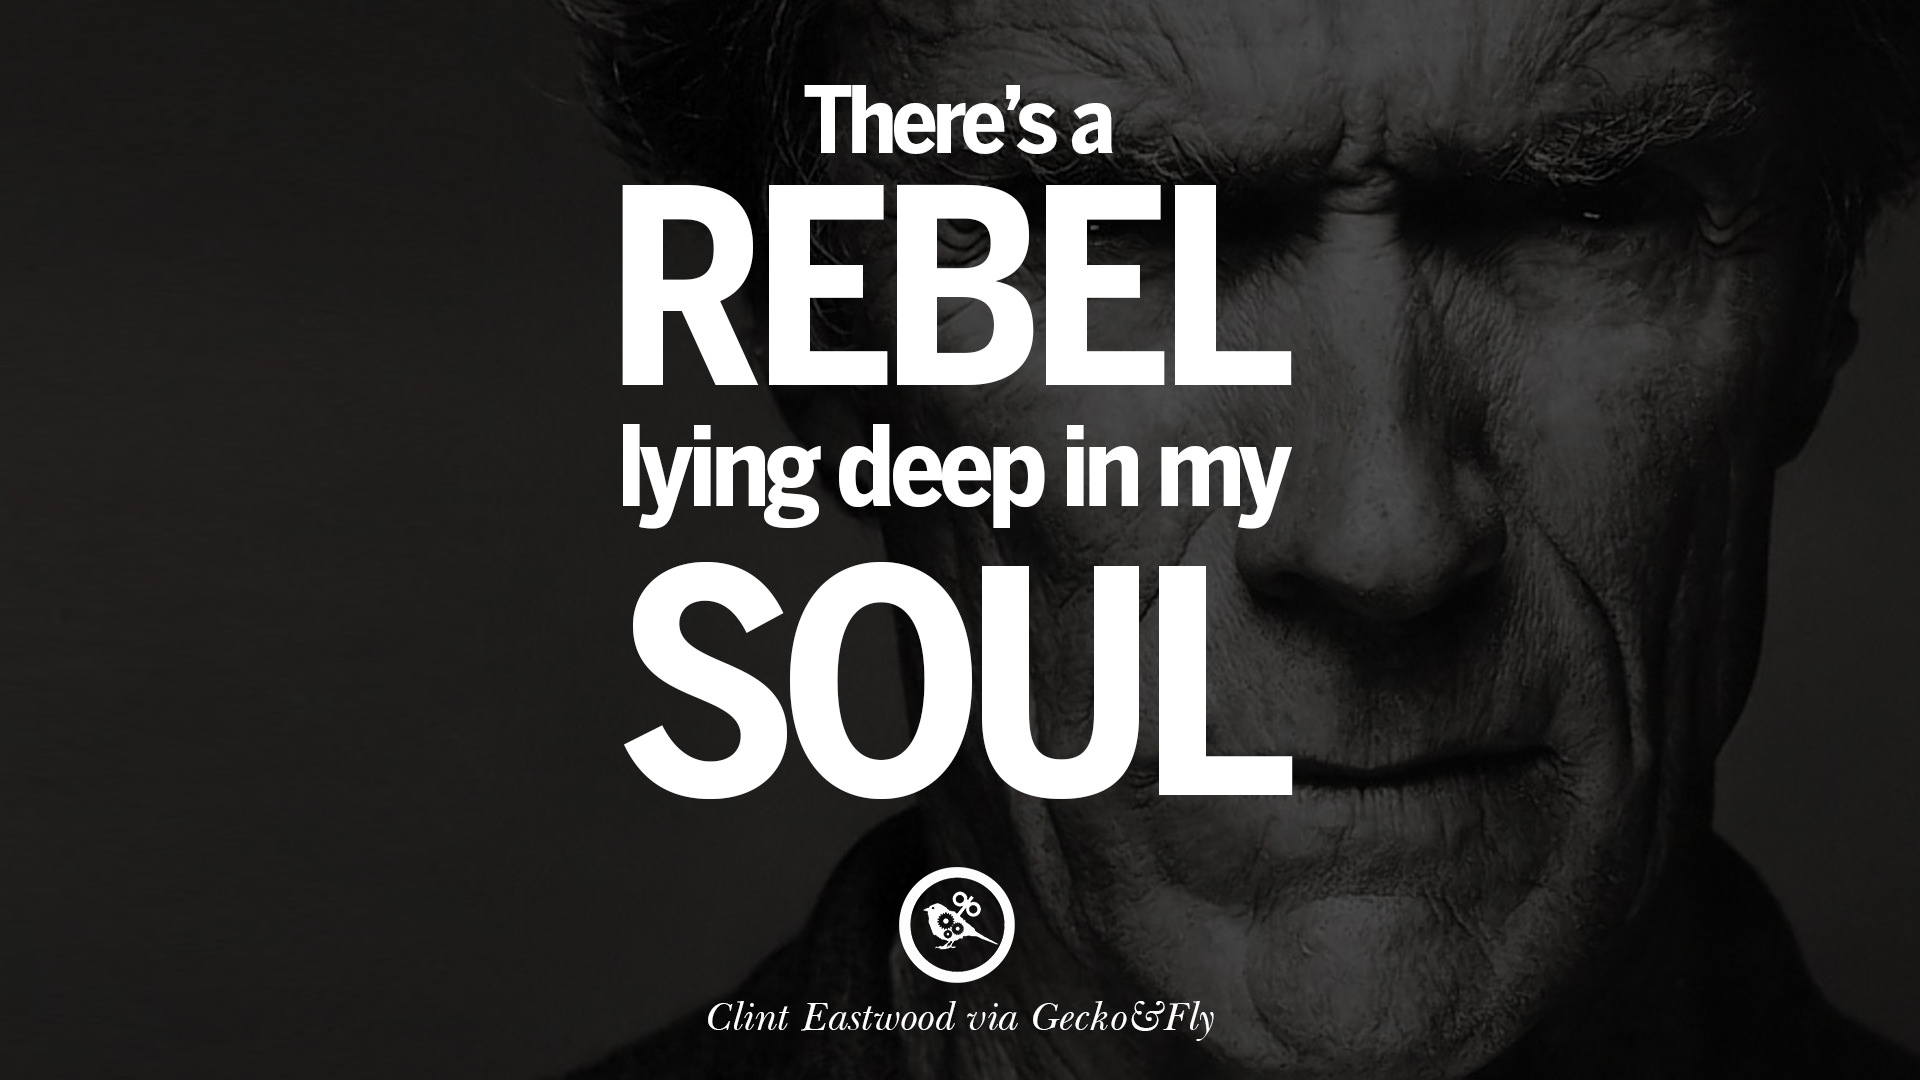 24 Inspiring Clint Eastwood Quotes On Politics Life And Work